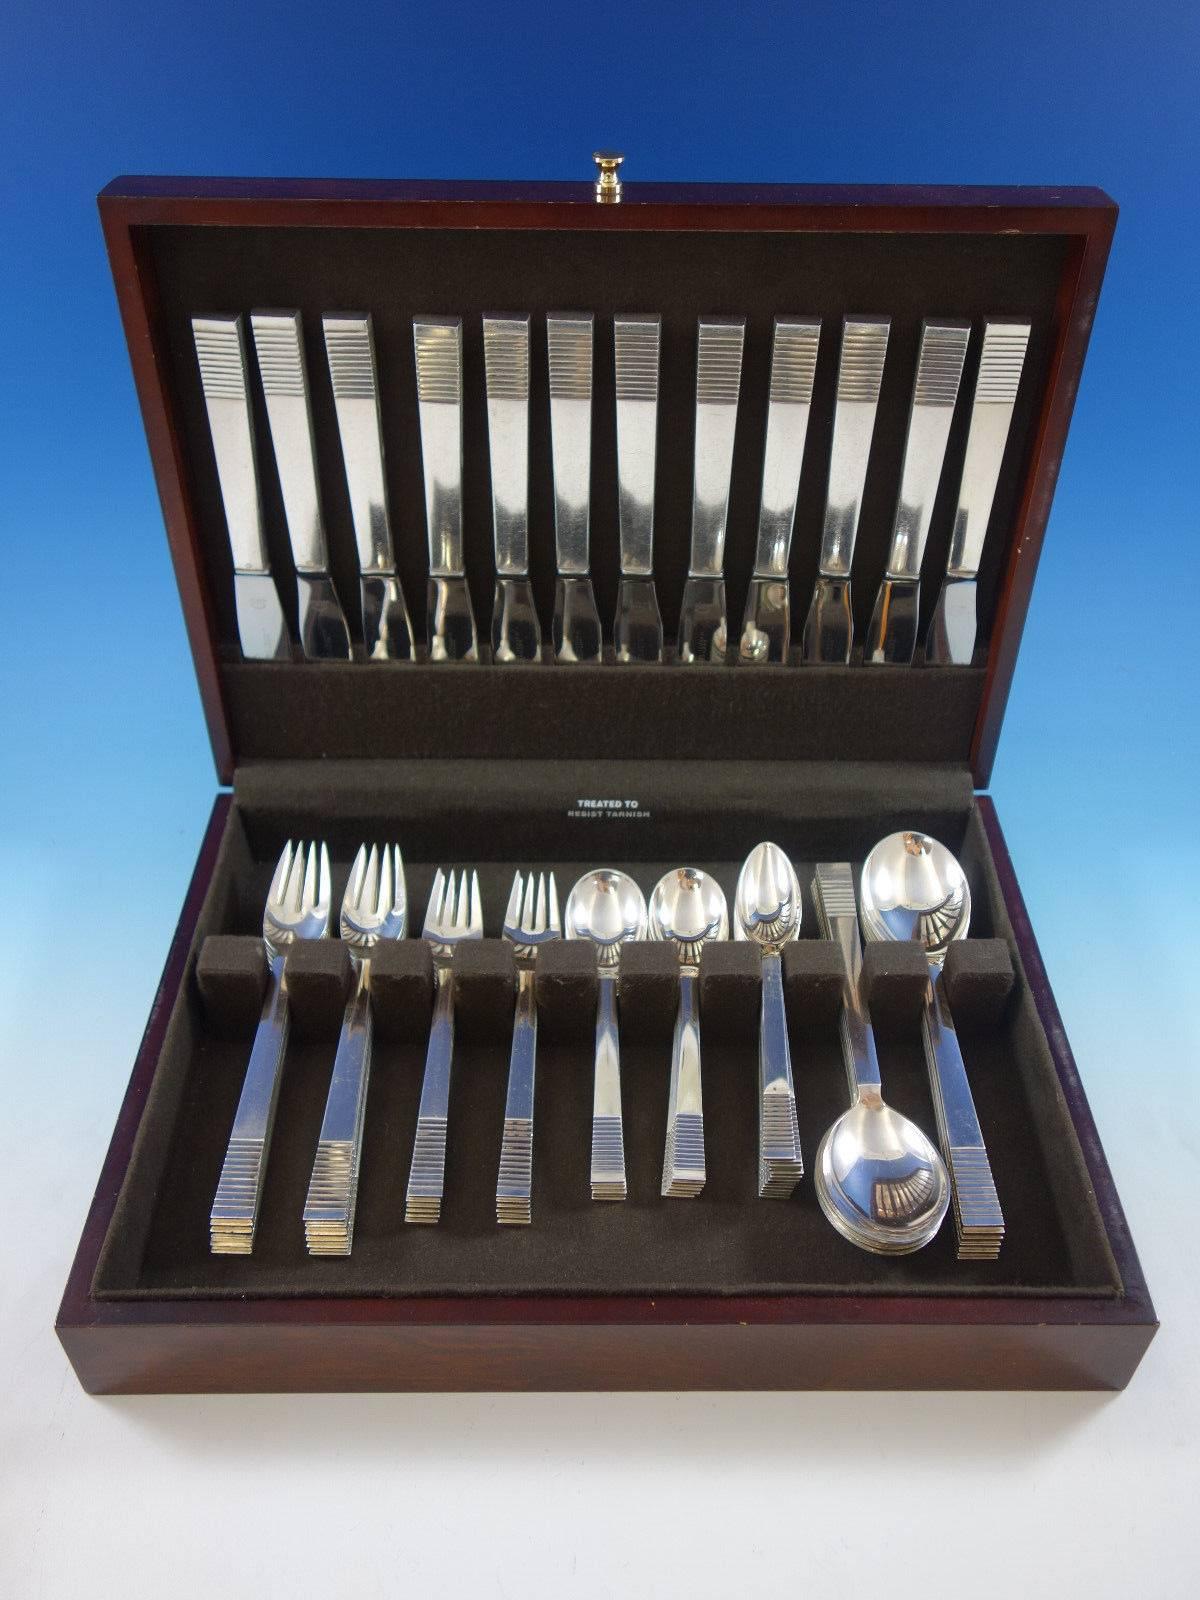 Parallel by Georg Jensen sterling silver flatware set, 72 pieces. This set includes: 12 dinner knives, 8 1/2", 12 dinner forks, 7 1/8", 12 salad forks, 6 1/4", 12 teaspoons, 5 3/4", 12 gumbo soup spoons, 7 1/2", 12 melon